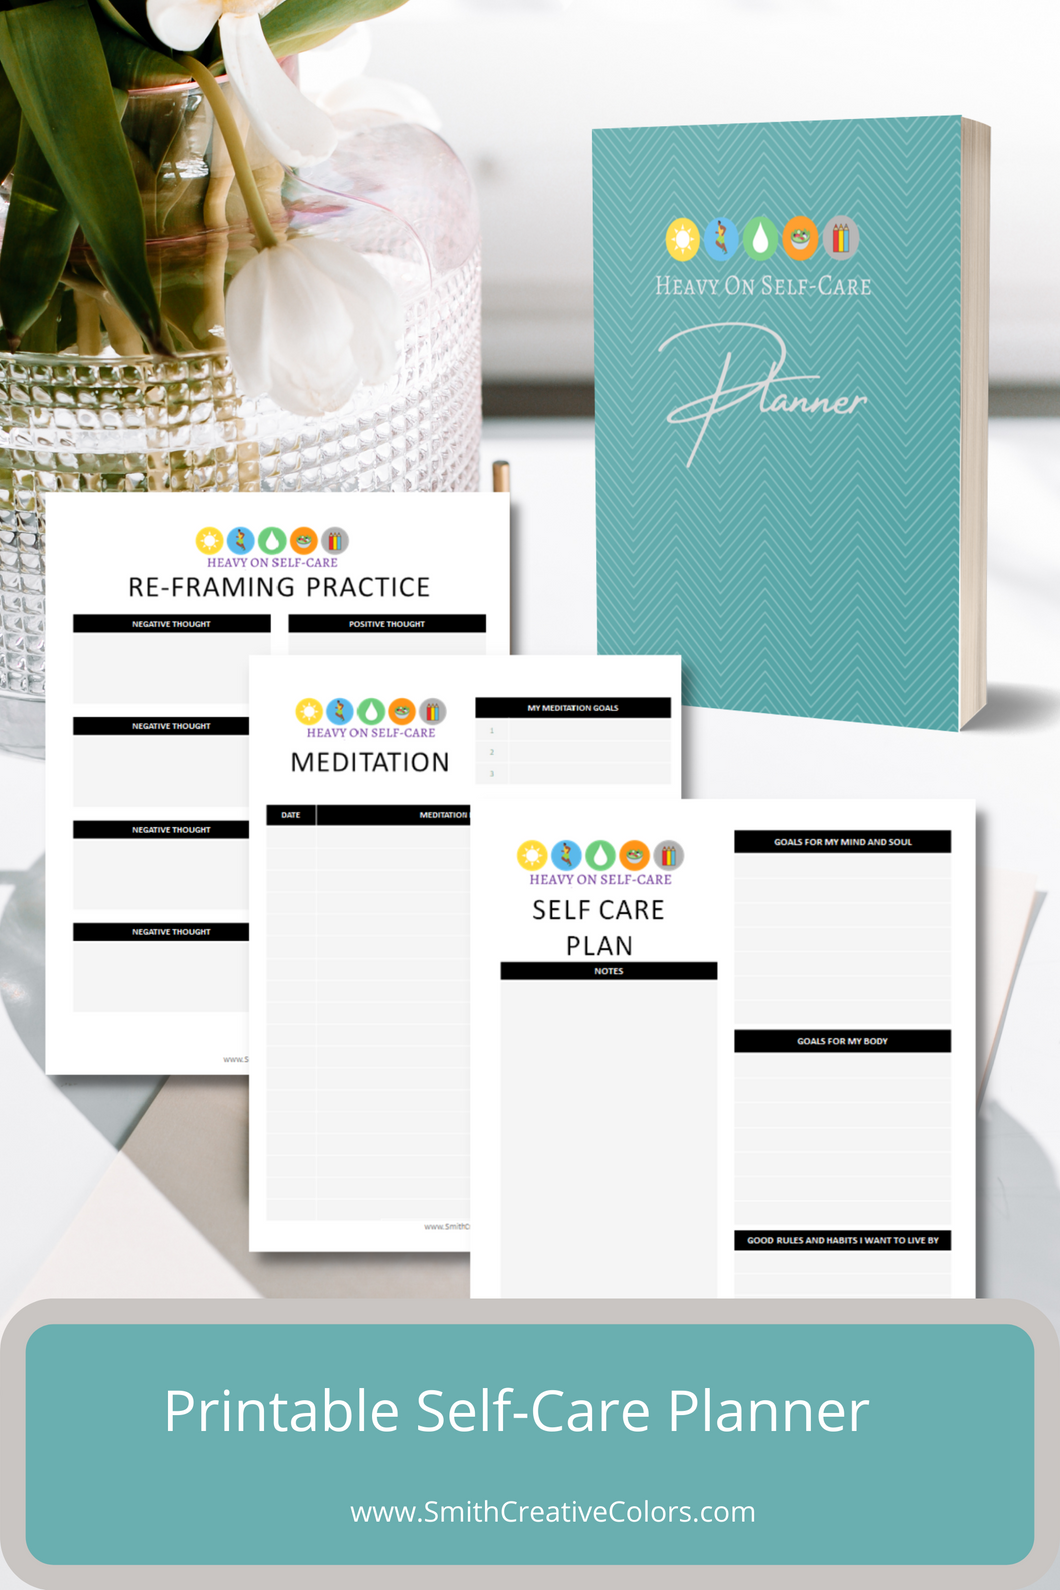 Heavy On Self-Care Printable Planner - 35 pages